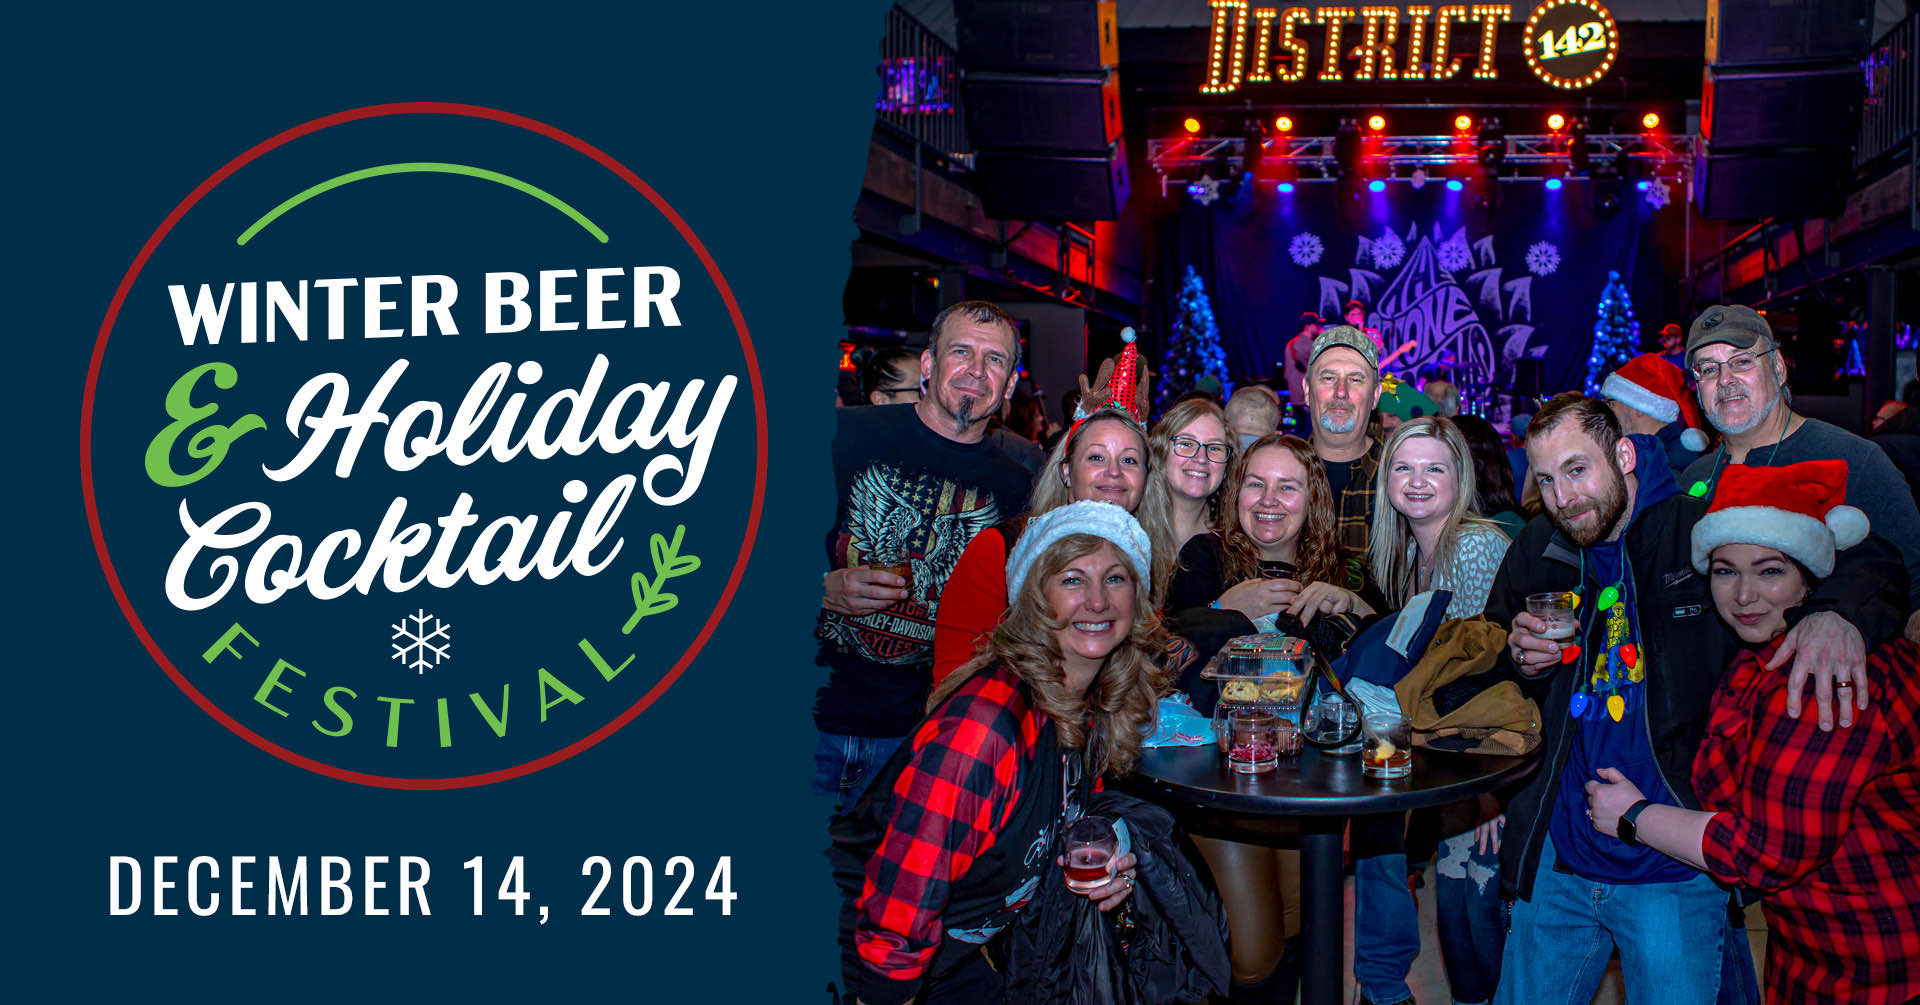 Winter Beer & Holiday Cocktail Festival; December 14, 2024; group of partiers in District 142 smiling at camera